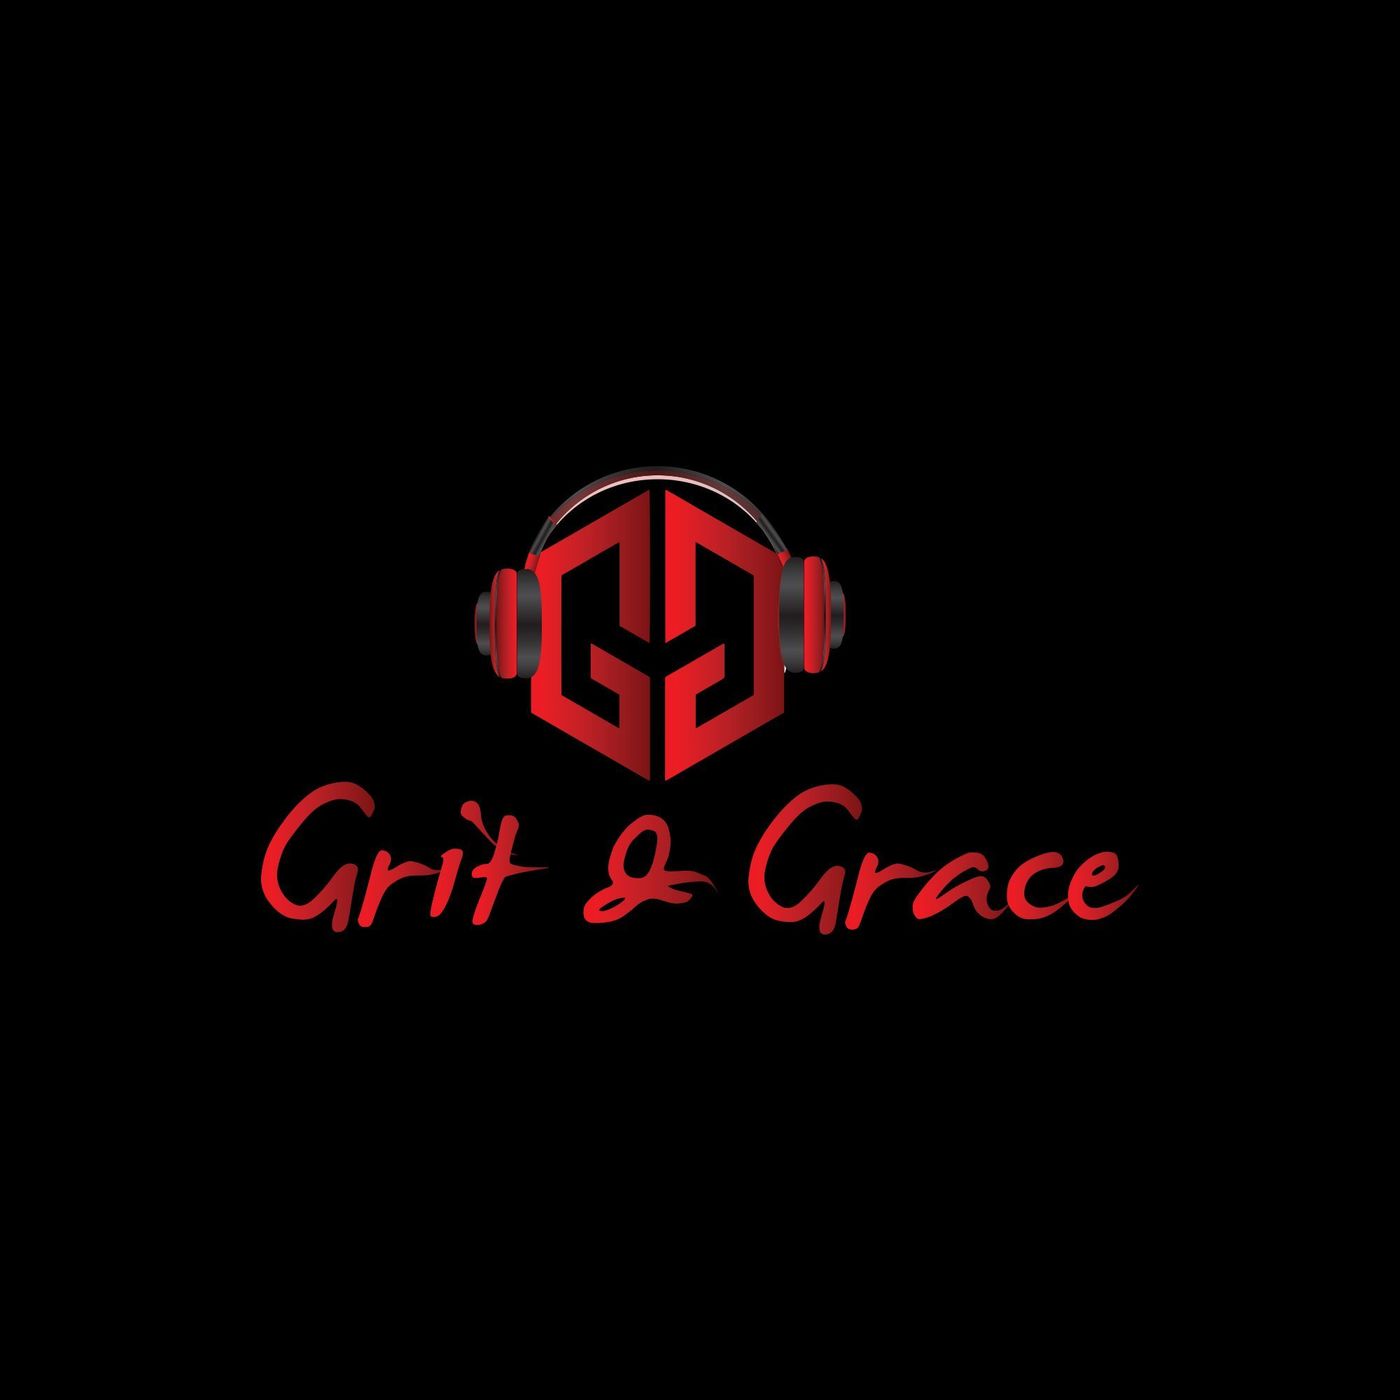 Grit and Grace: How to Become a Master Connector and Collaboration